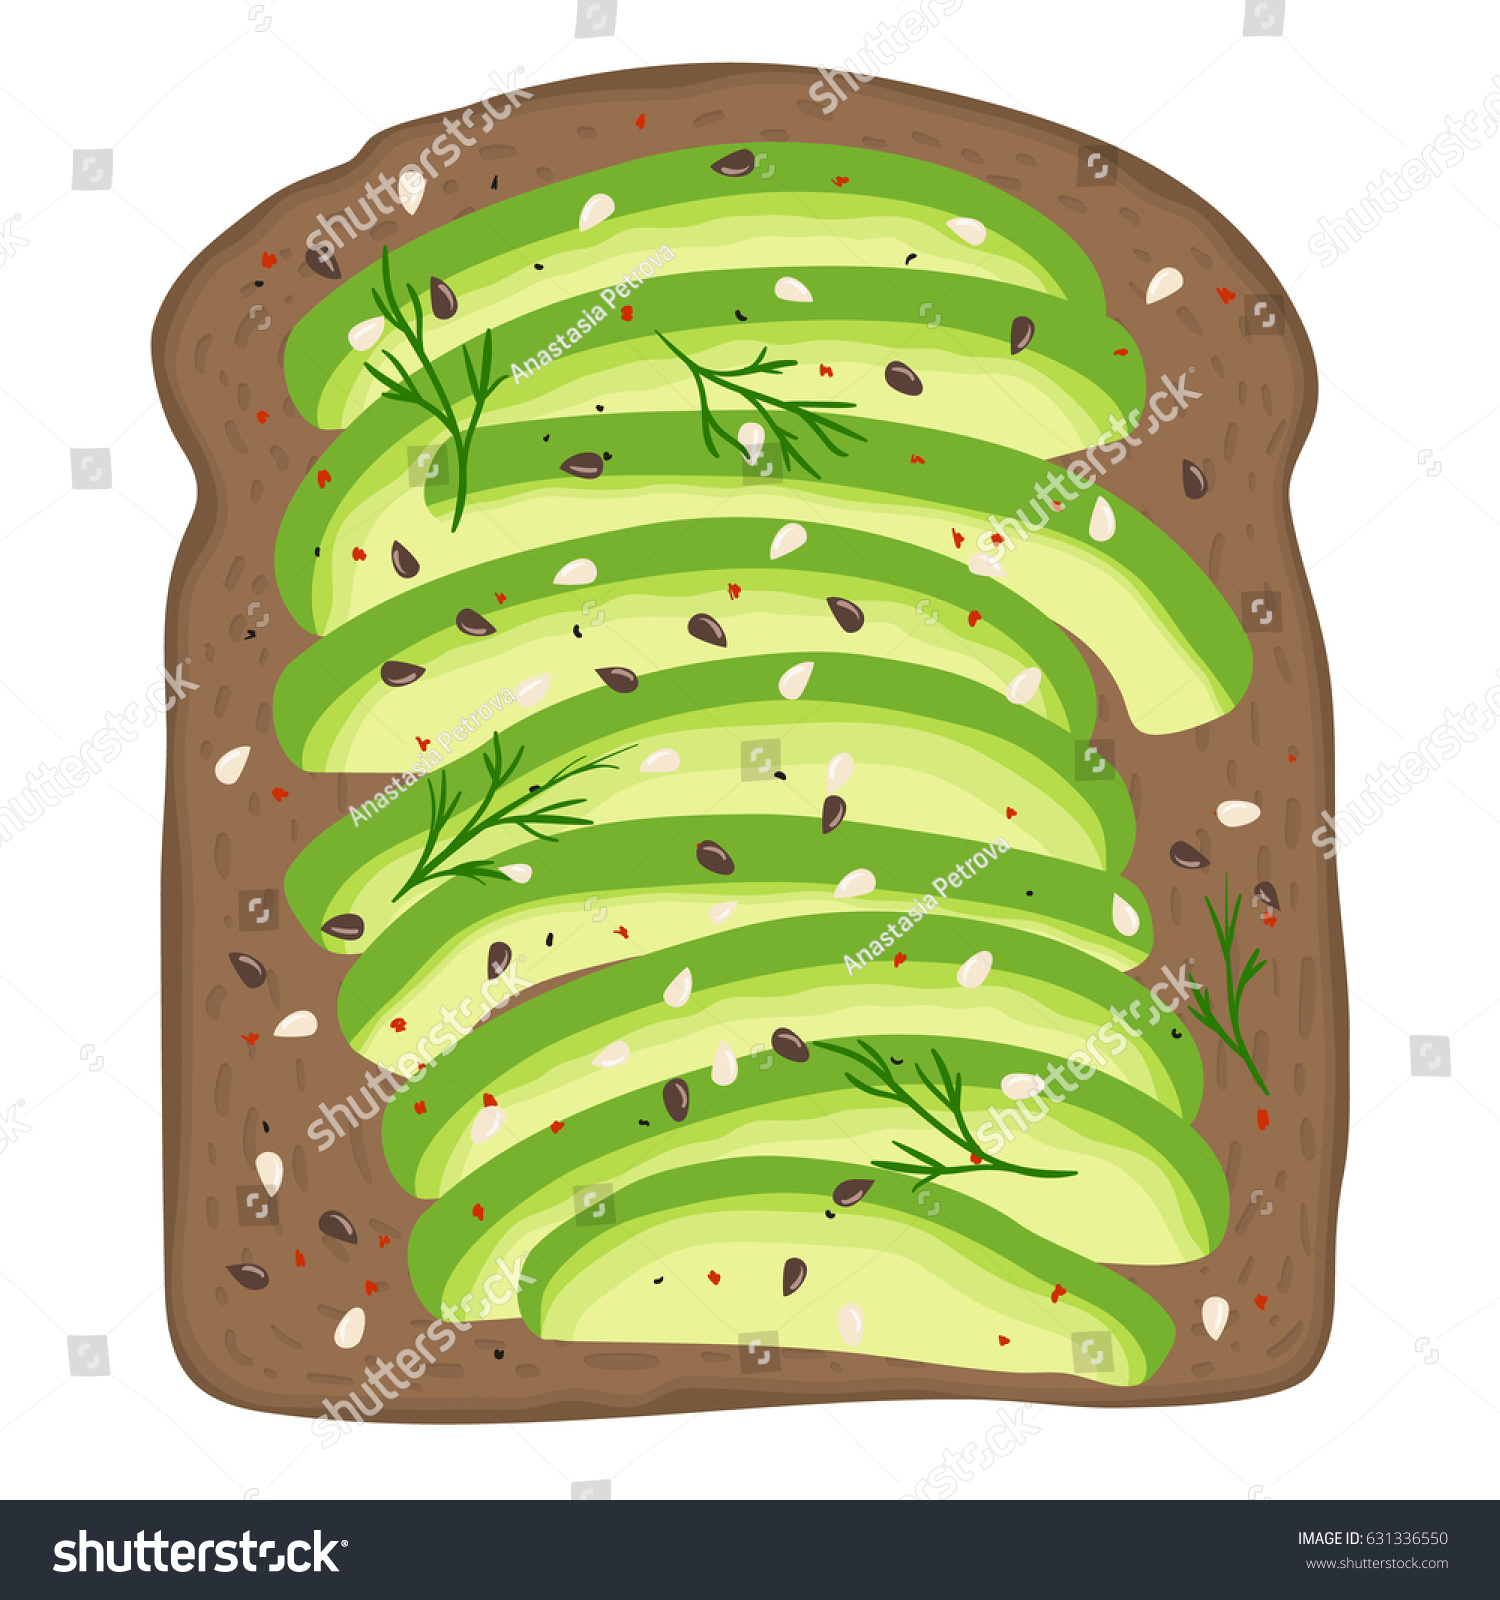 SVG of Avocado toast. Fresh toasted dark rye bread with slices of ripe avocado. Delicious avocado sandwich with sesame seeds, seasoning and dill. Hand drawn vector illustration. svg